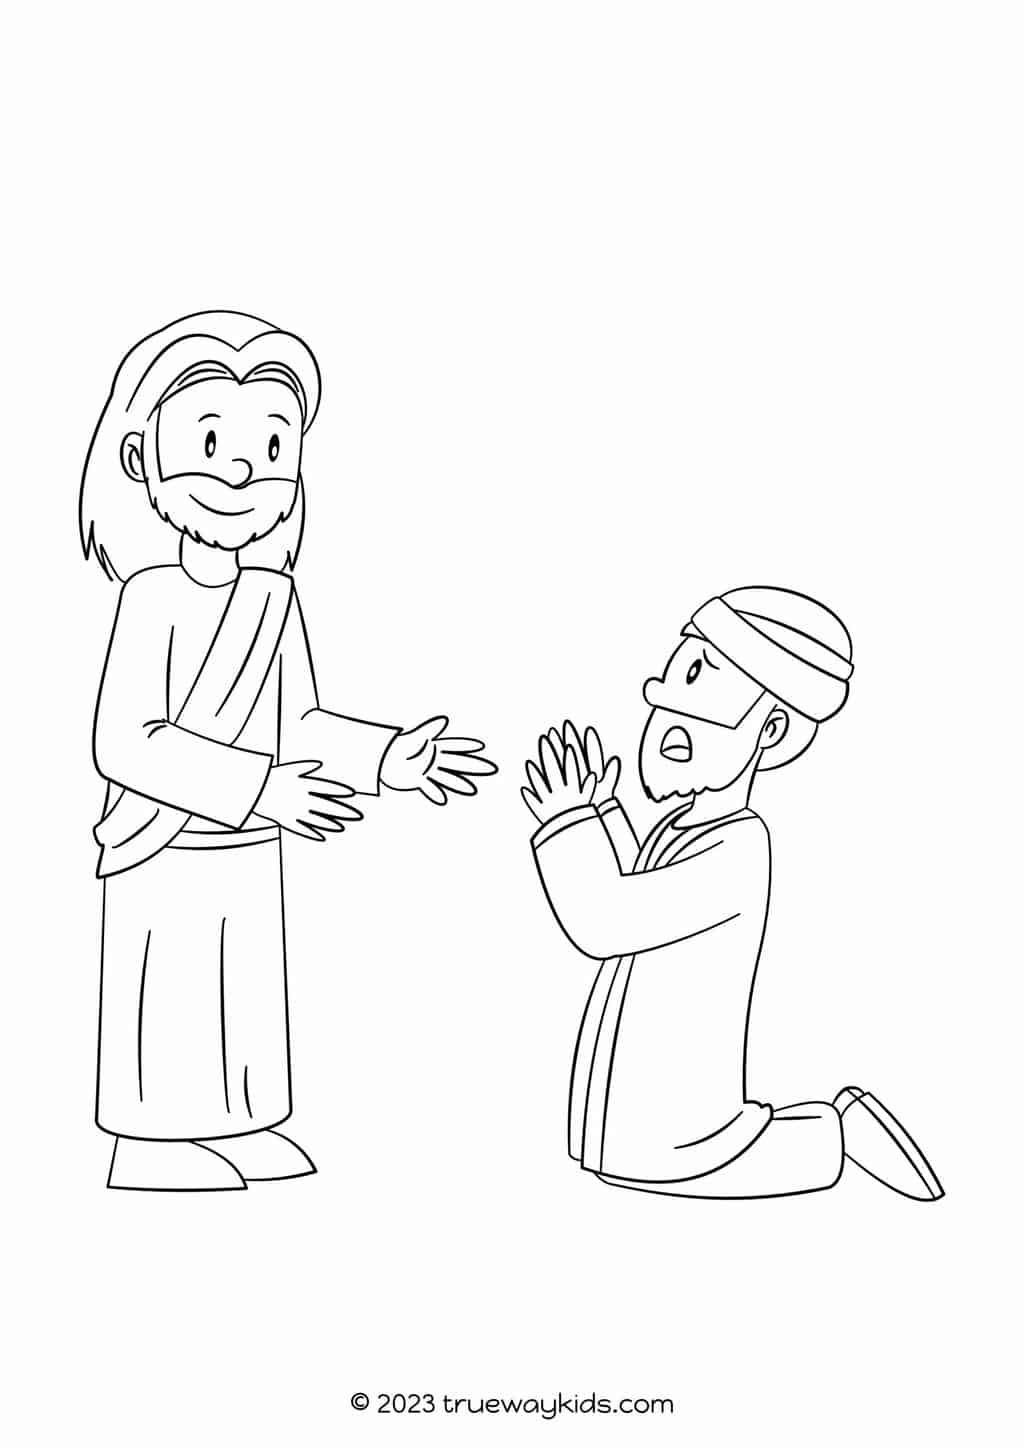 Jesus and Thomas - Bible lessons for kids - Trueway Kids